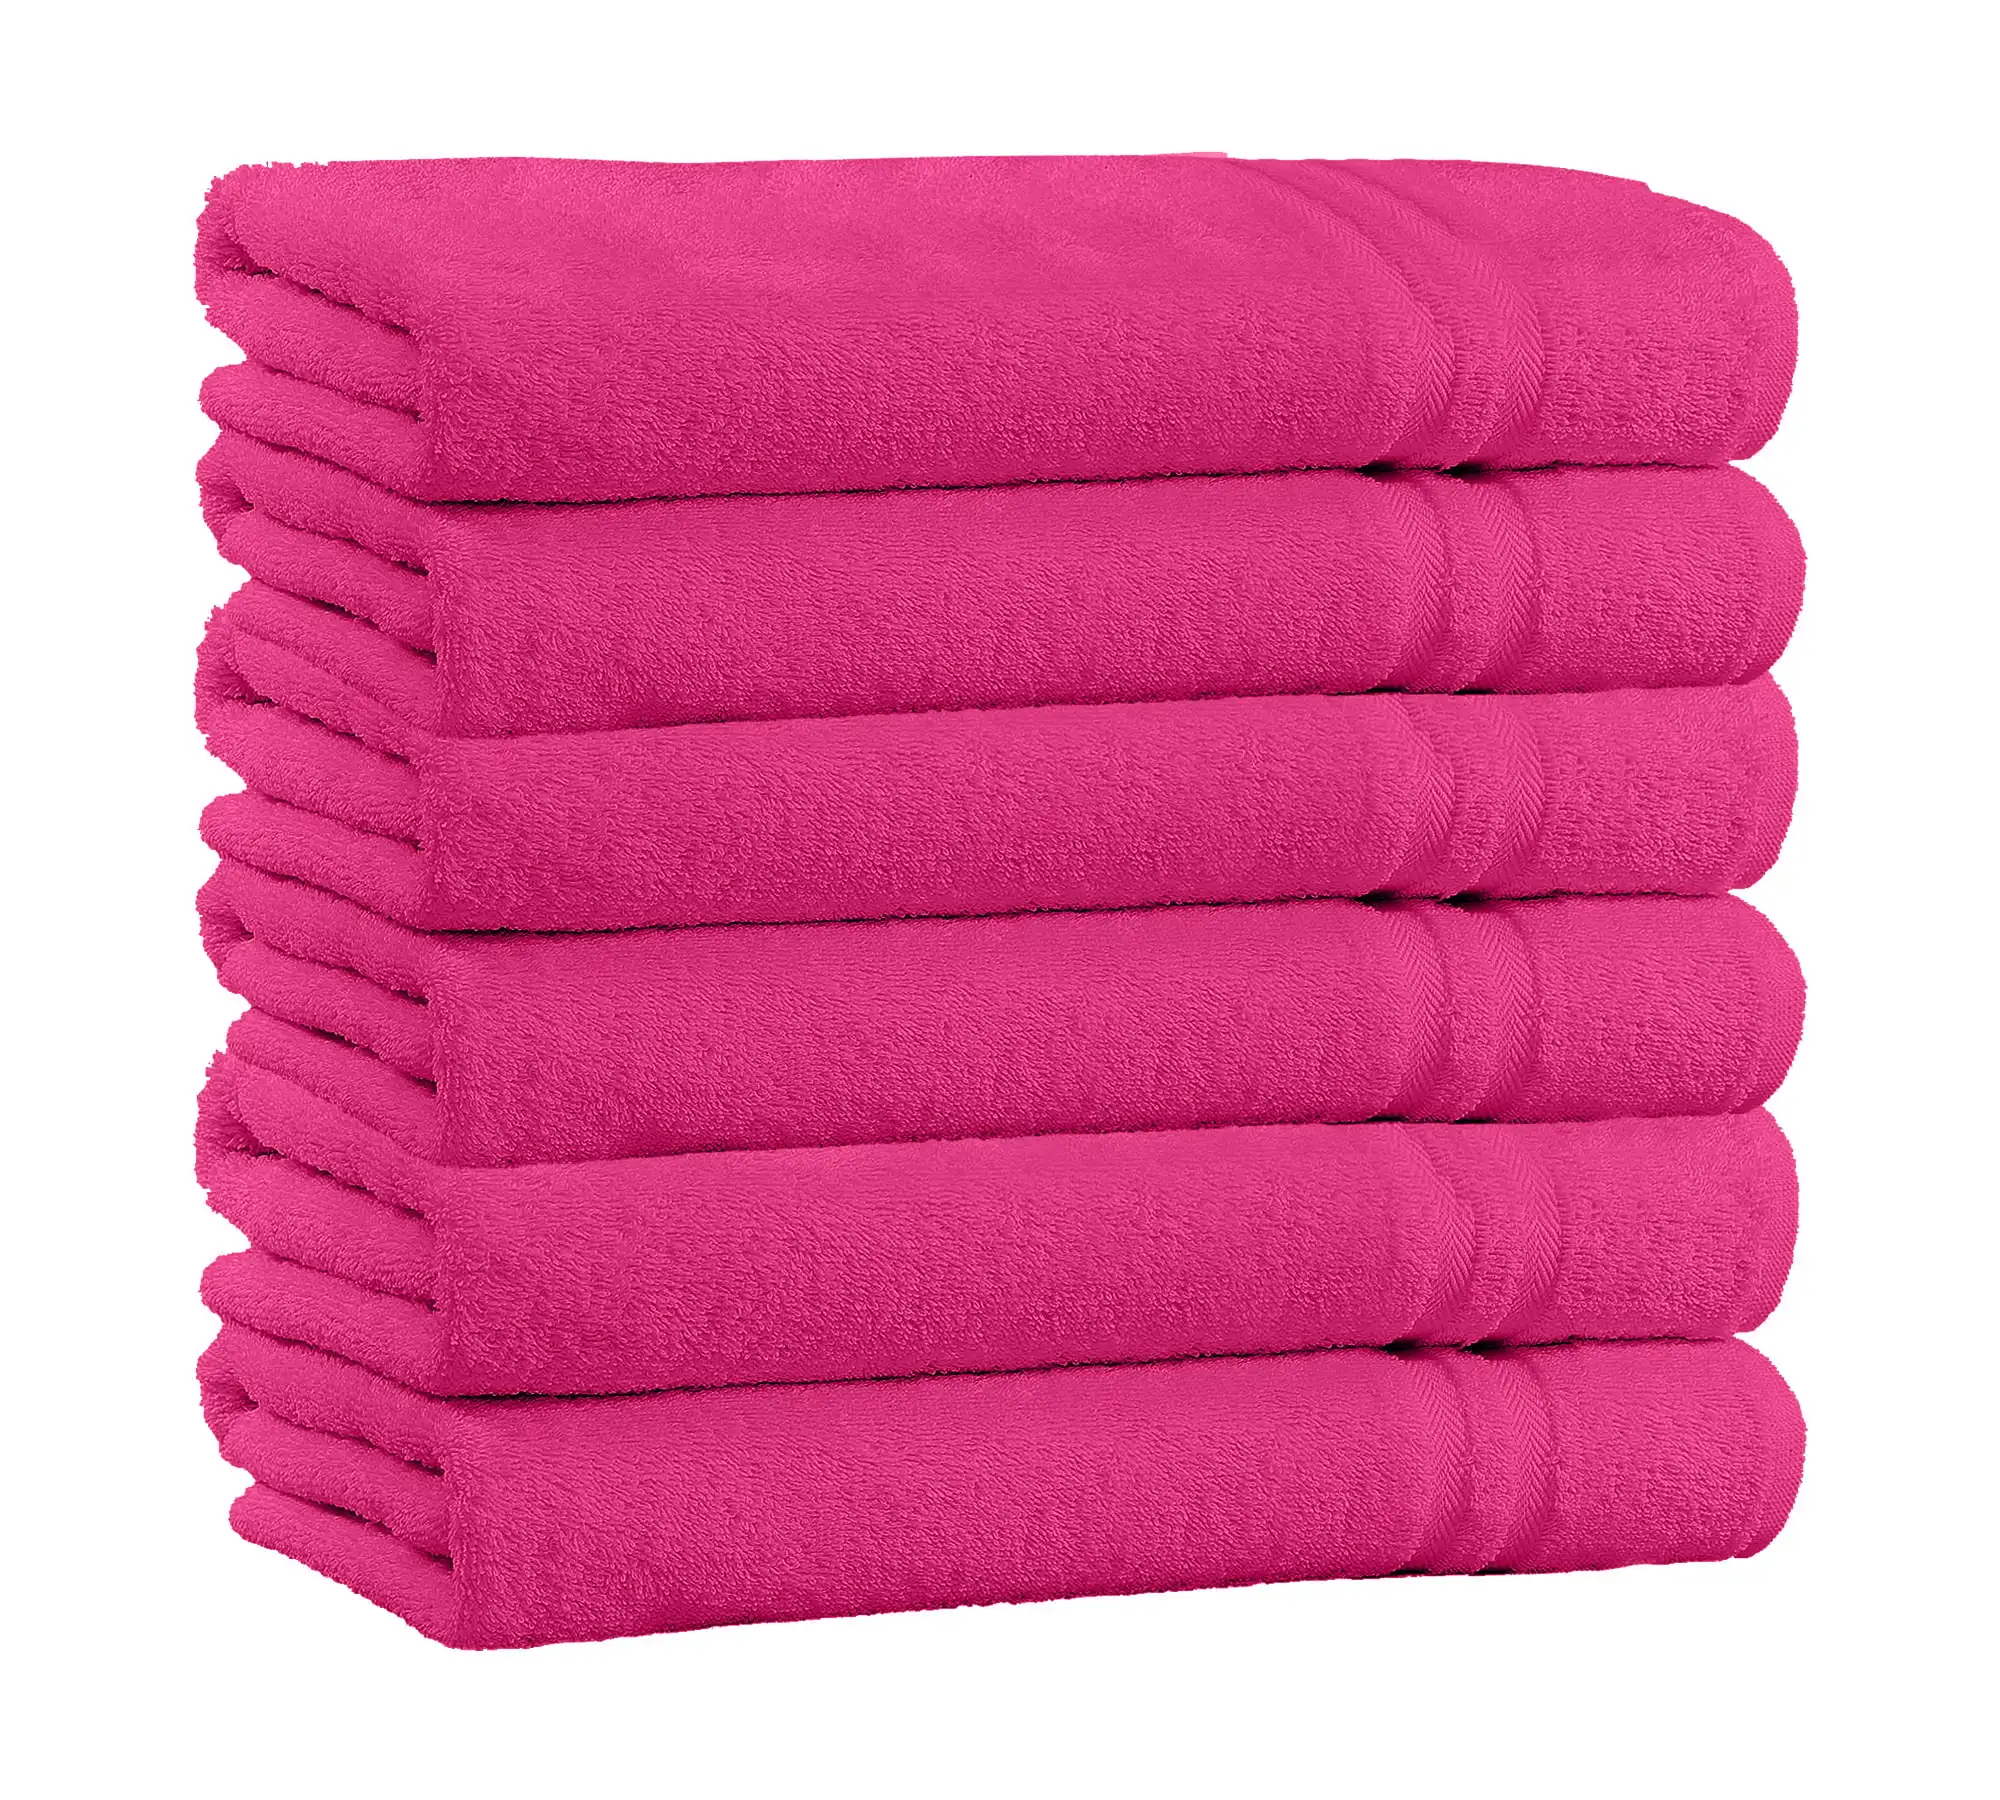 

Cotton 4-Pack Bath Towel Sets - Extra Plush & Absorbent Over-sized Bath Towels - 54" x 27" (Assorted)Face Bath Towels wash clean